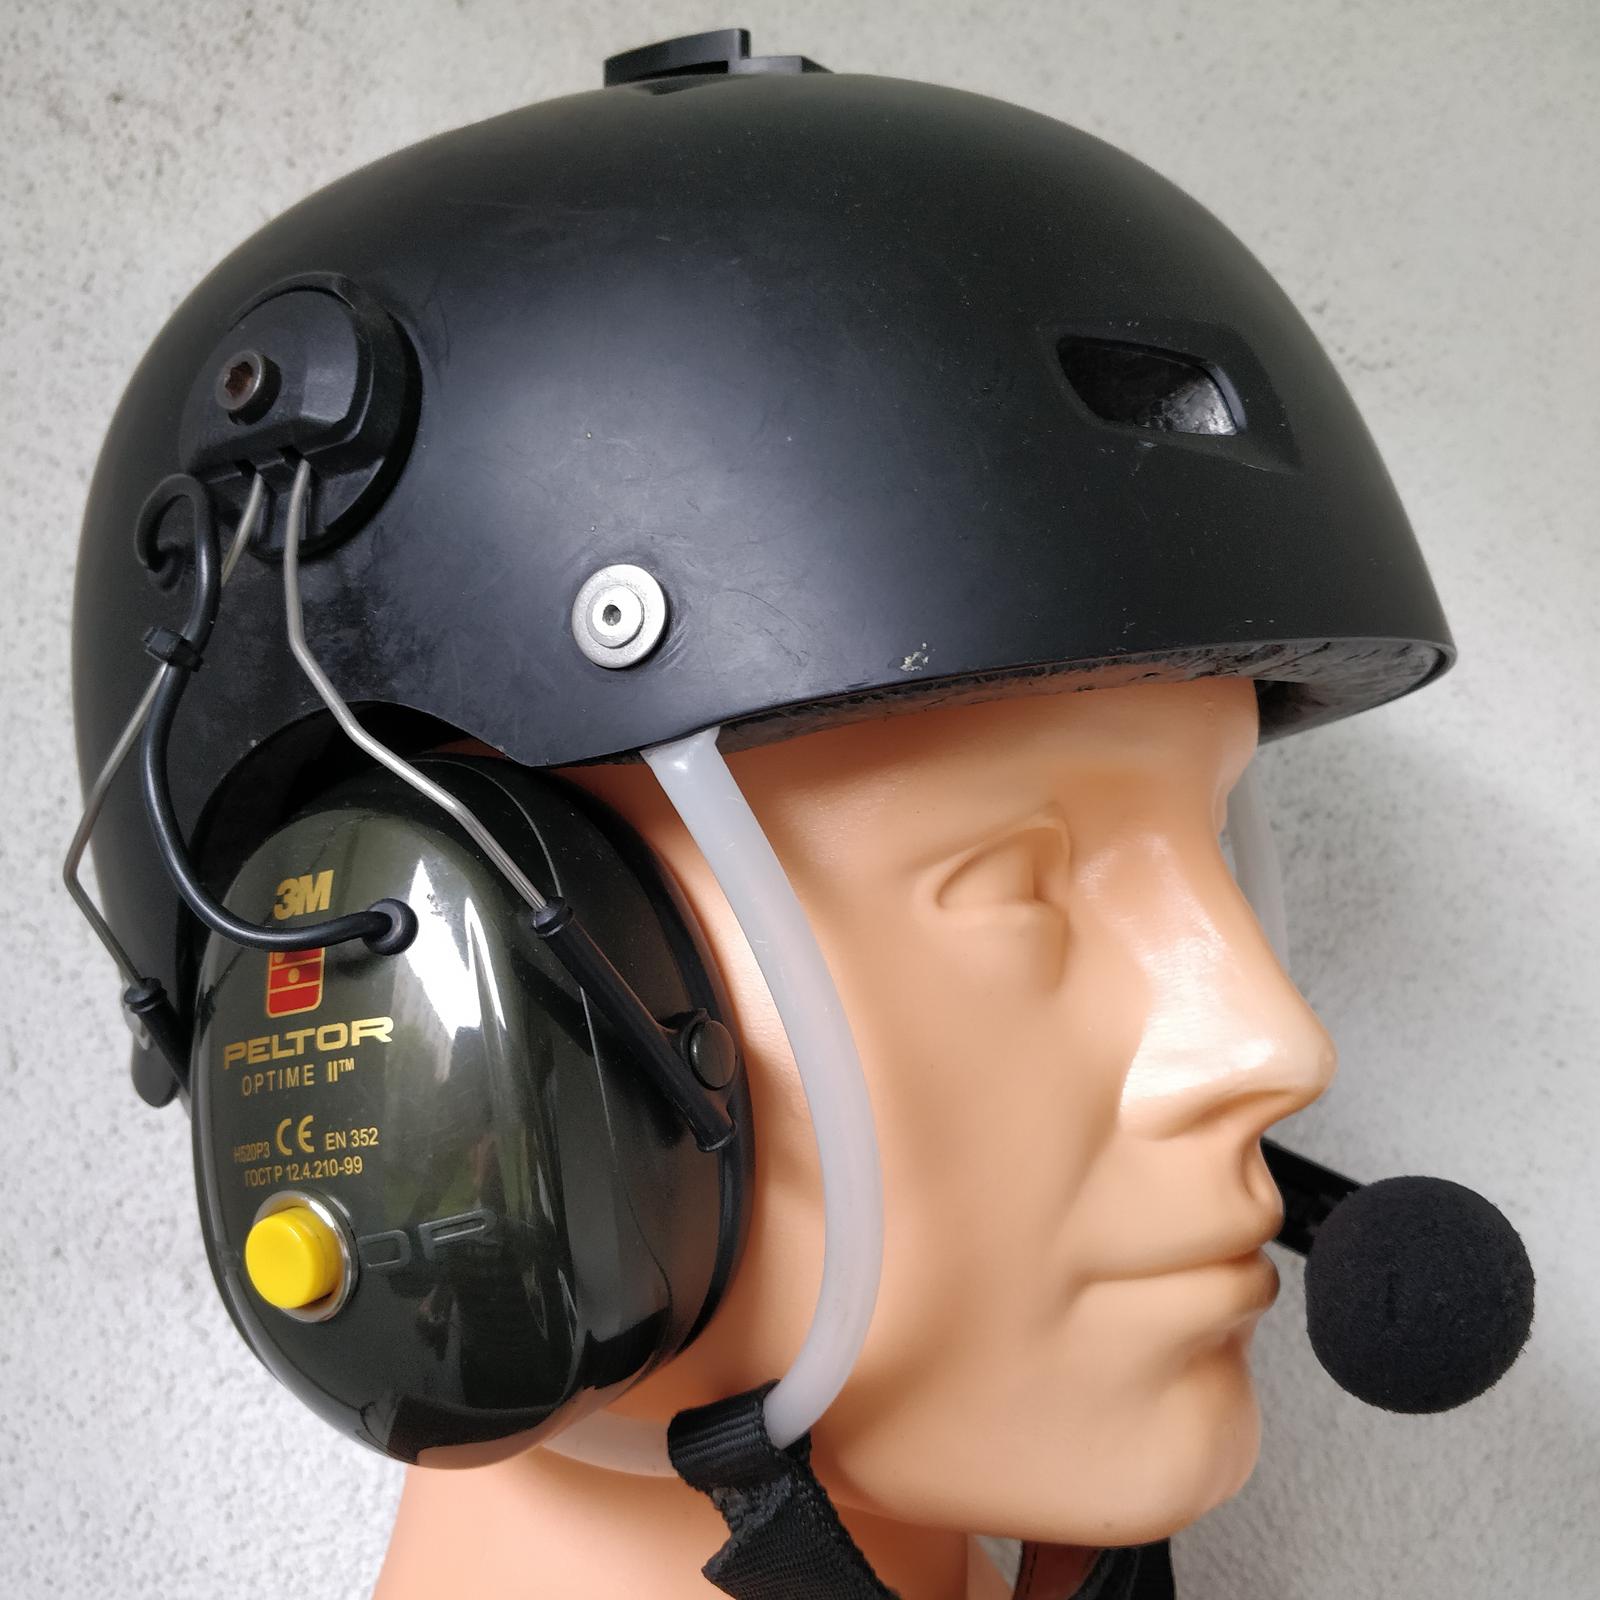 Top Student Pilot Headsets: Find the Best for Your Flight Training!